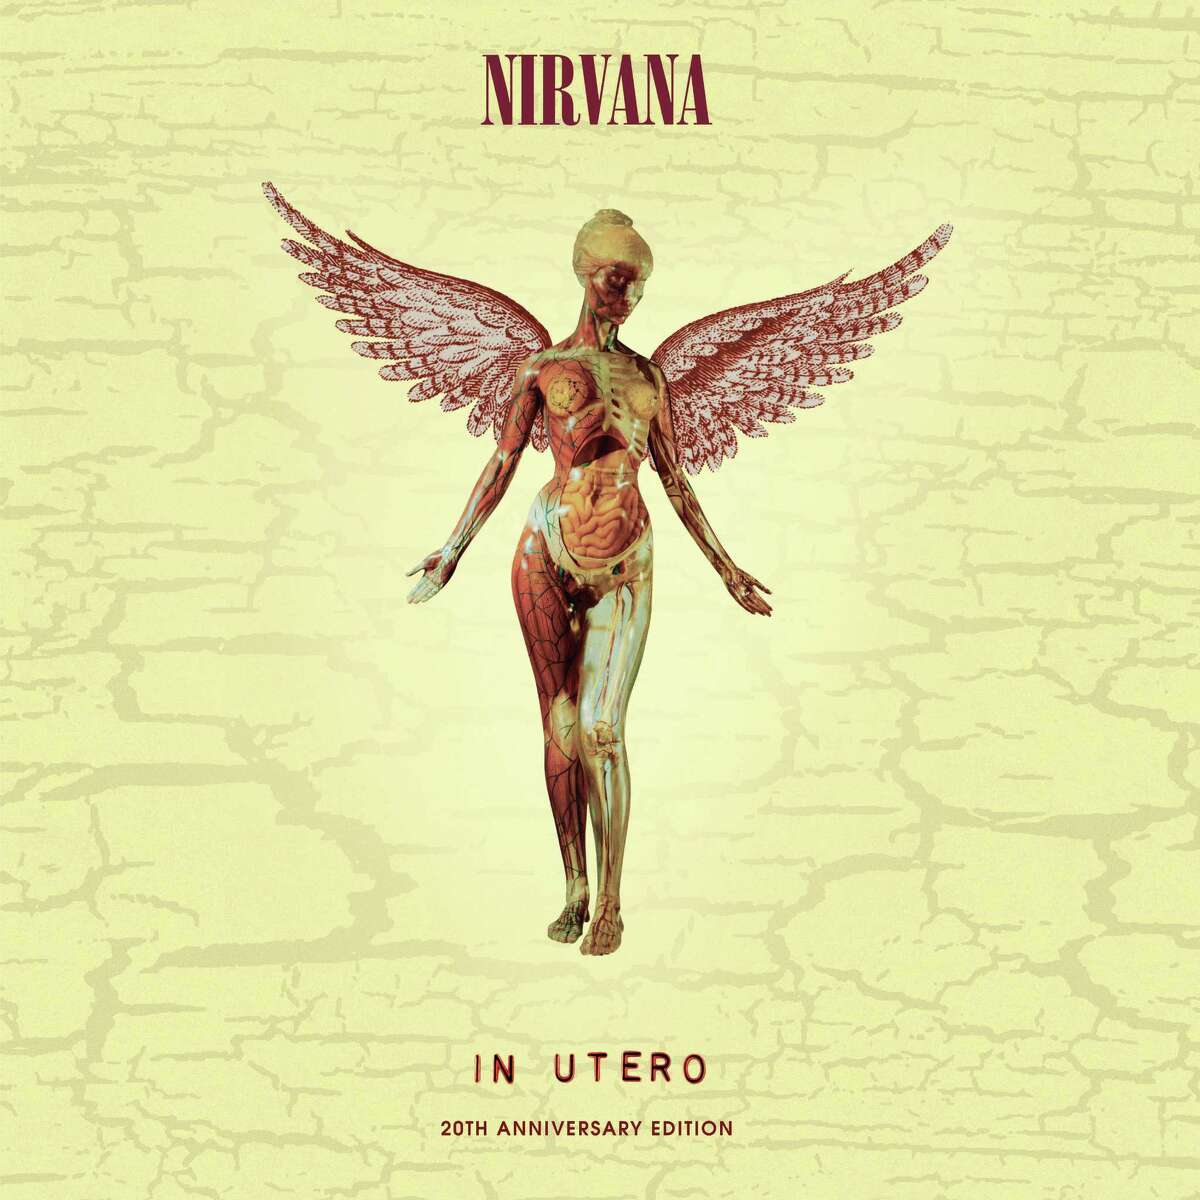 The sound on Nirvana's “In Utero” album was loud and raw. A 20th anniversary edition will be released Tuesday.